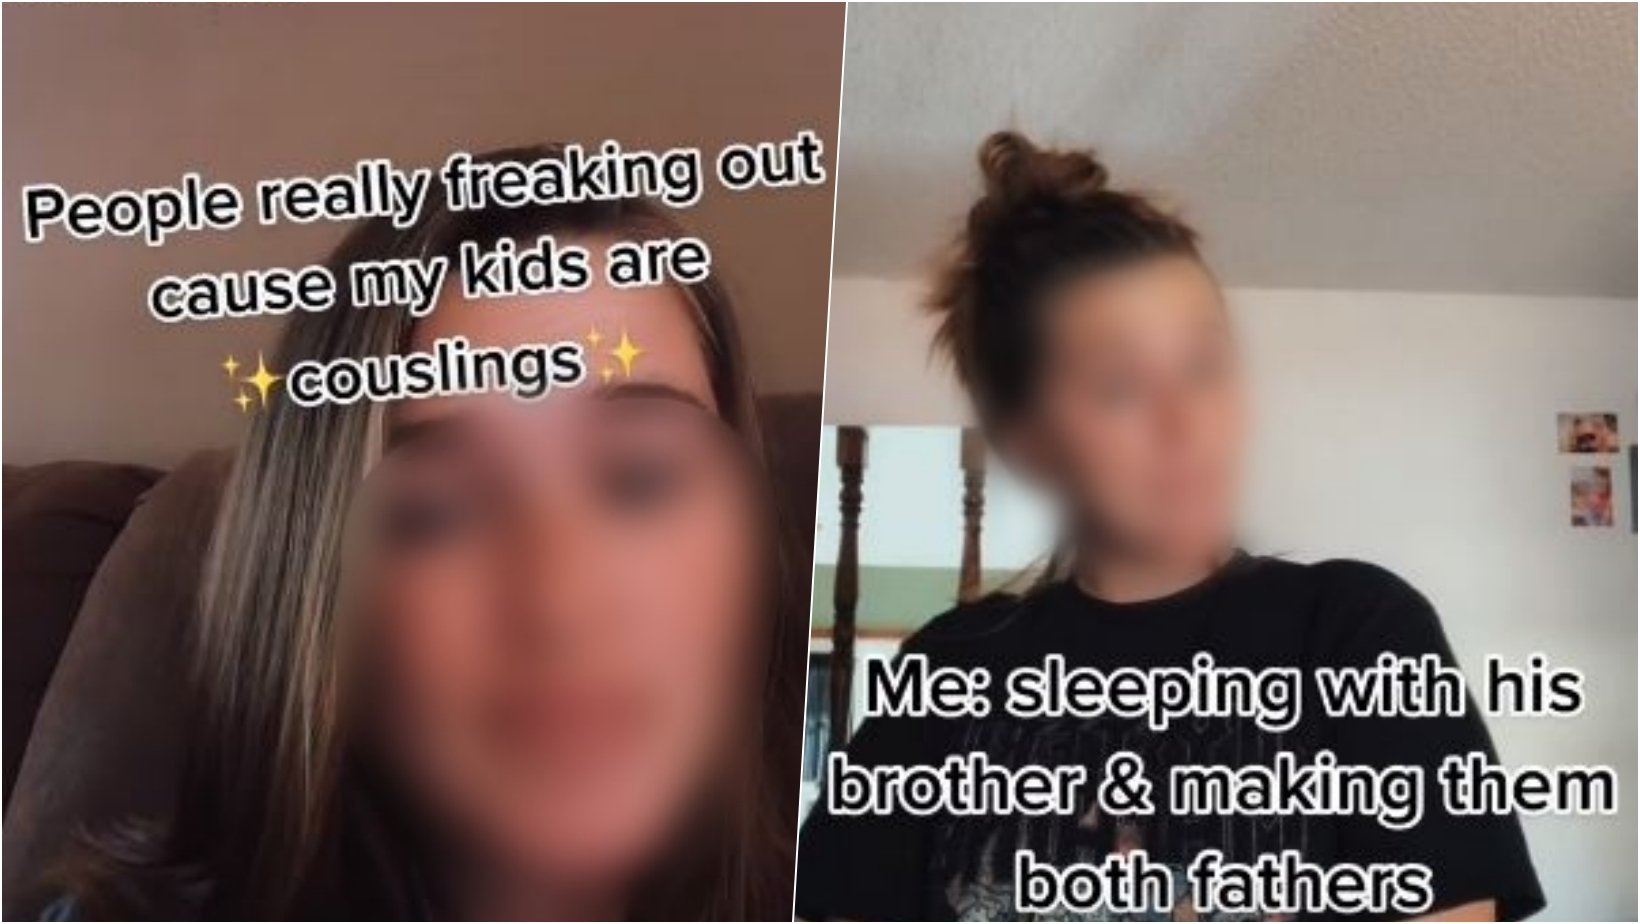 6 facebook cover 2.jpg?resize=1200,630 - Mom Reveals Her Kids Are “Couslings” After Having A Baby With Her Cheating Ex Boyfriend’s Brother For Revenge